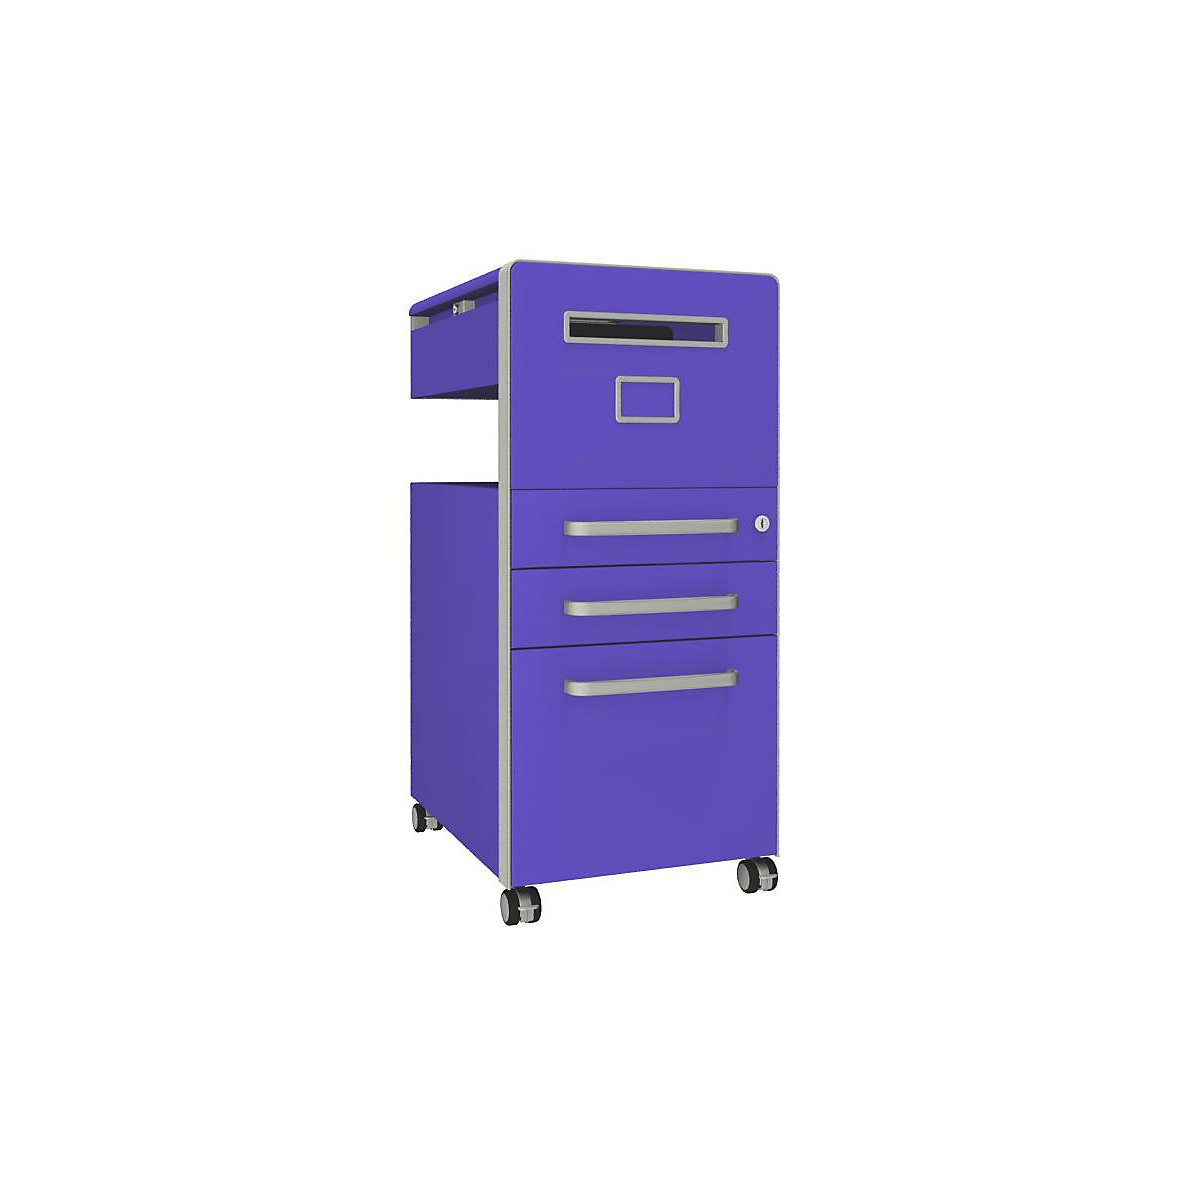 Bite™ pedestal furniture, with 1 whiteboard, opens on the right side – BISLEY, with 2 universal drawers, 1 suspension file drawer, parma-28